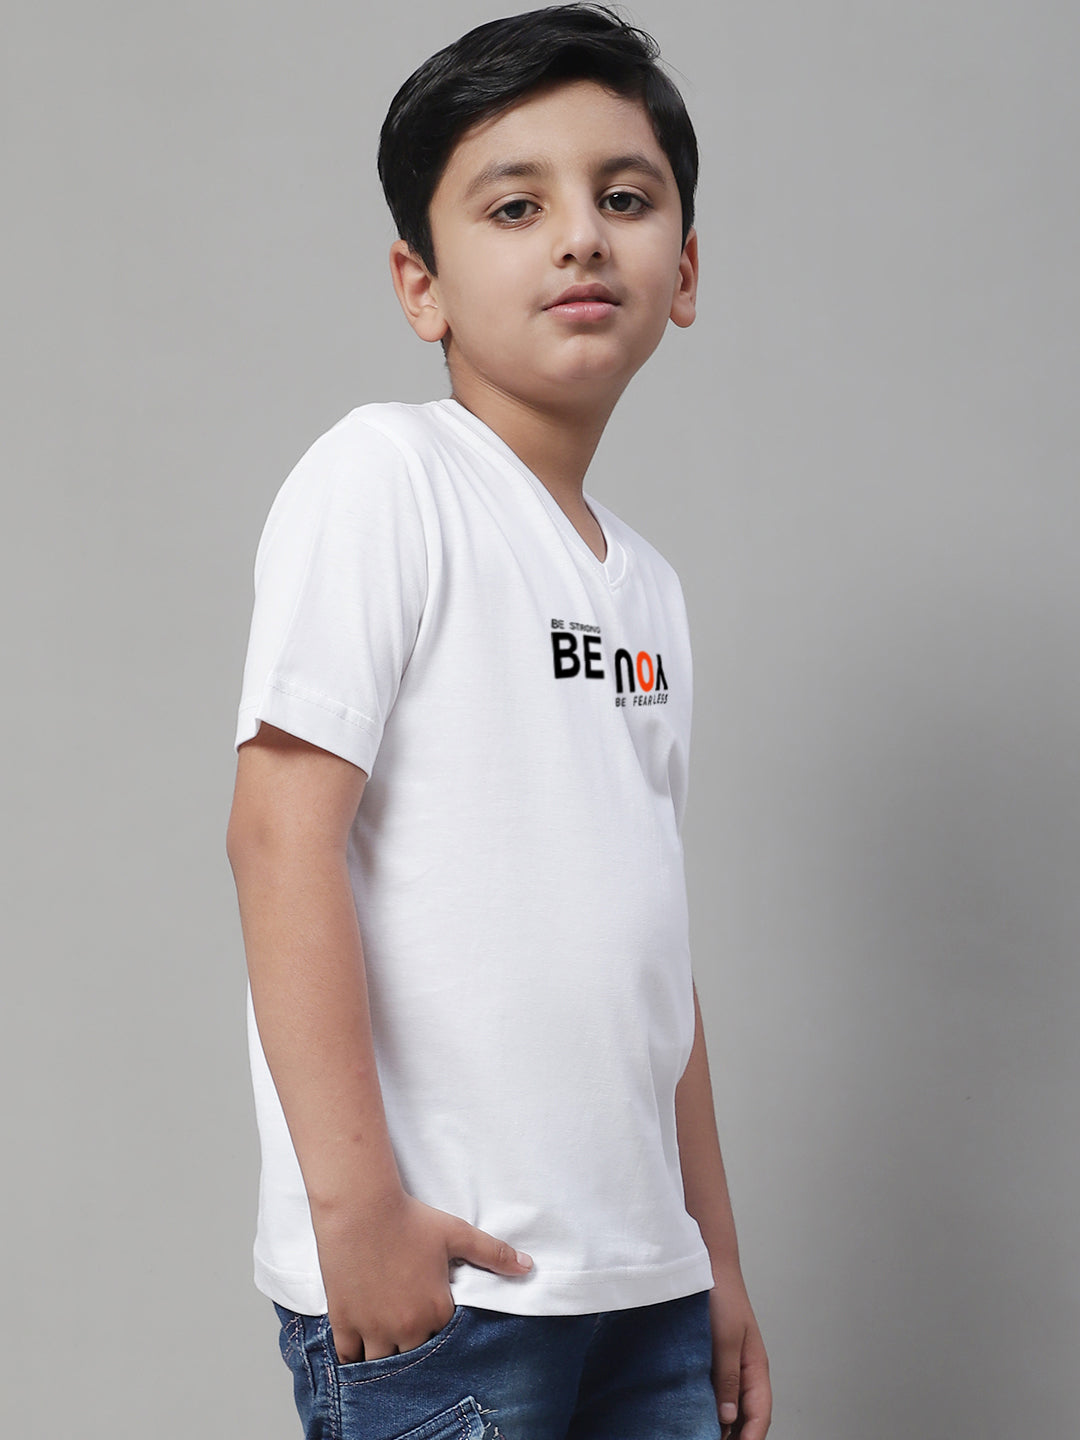 Boys Be You Half Sleeves Printed T-Shirt - Friskers